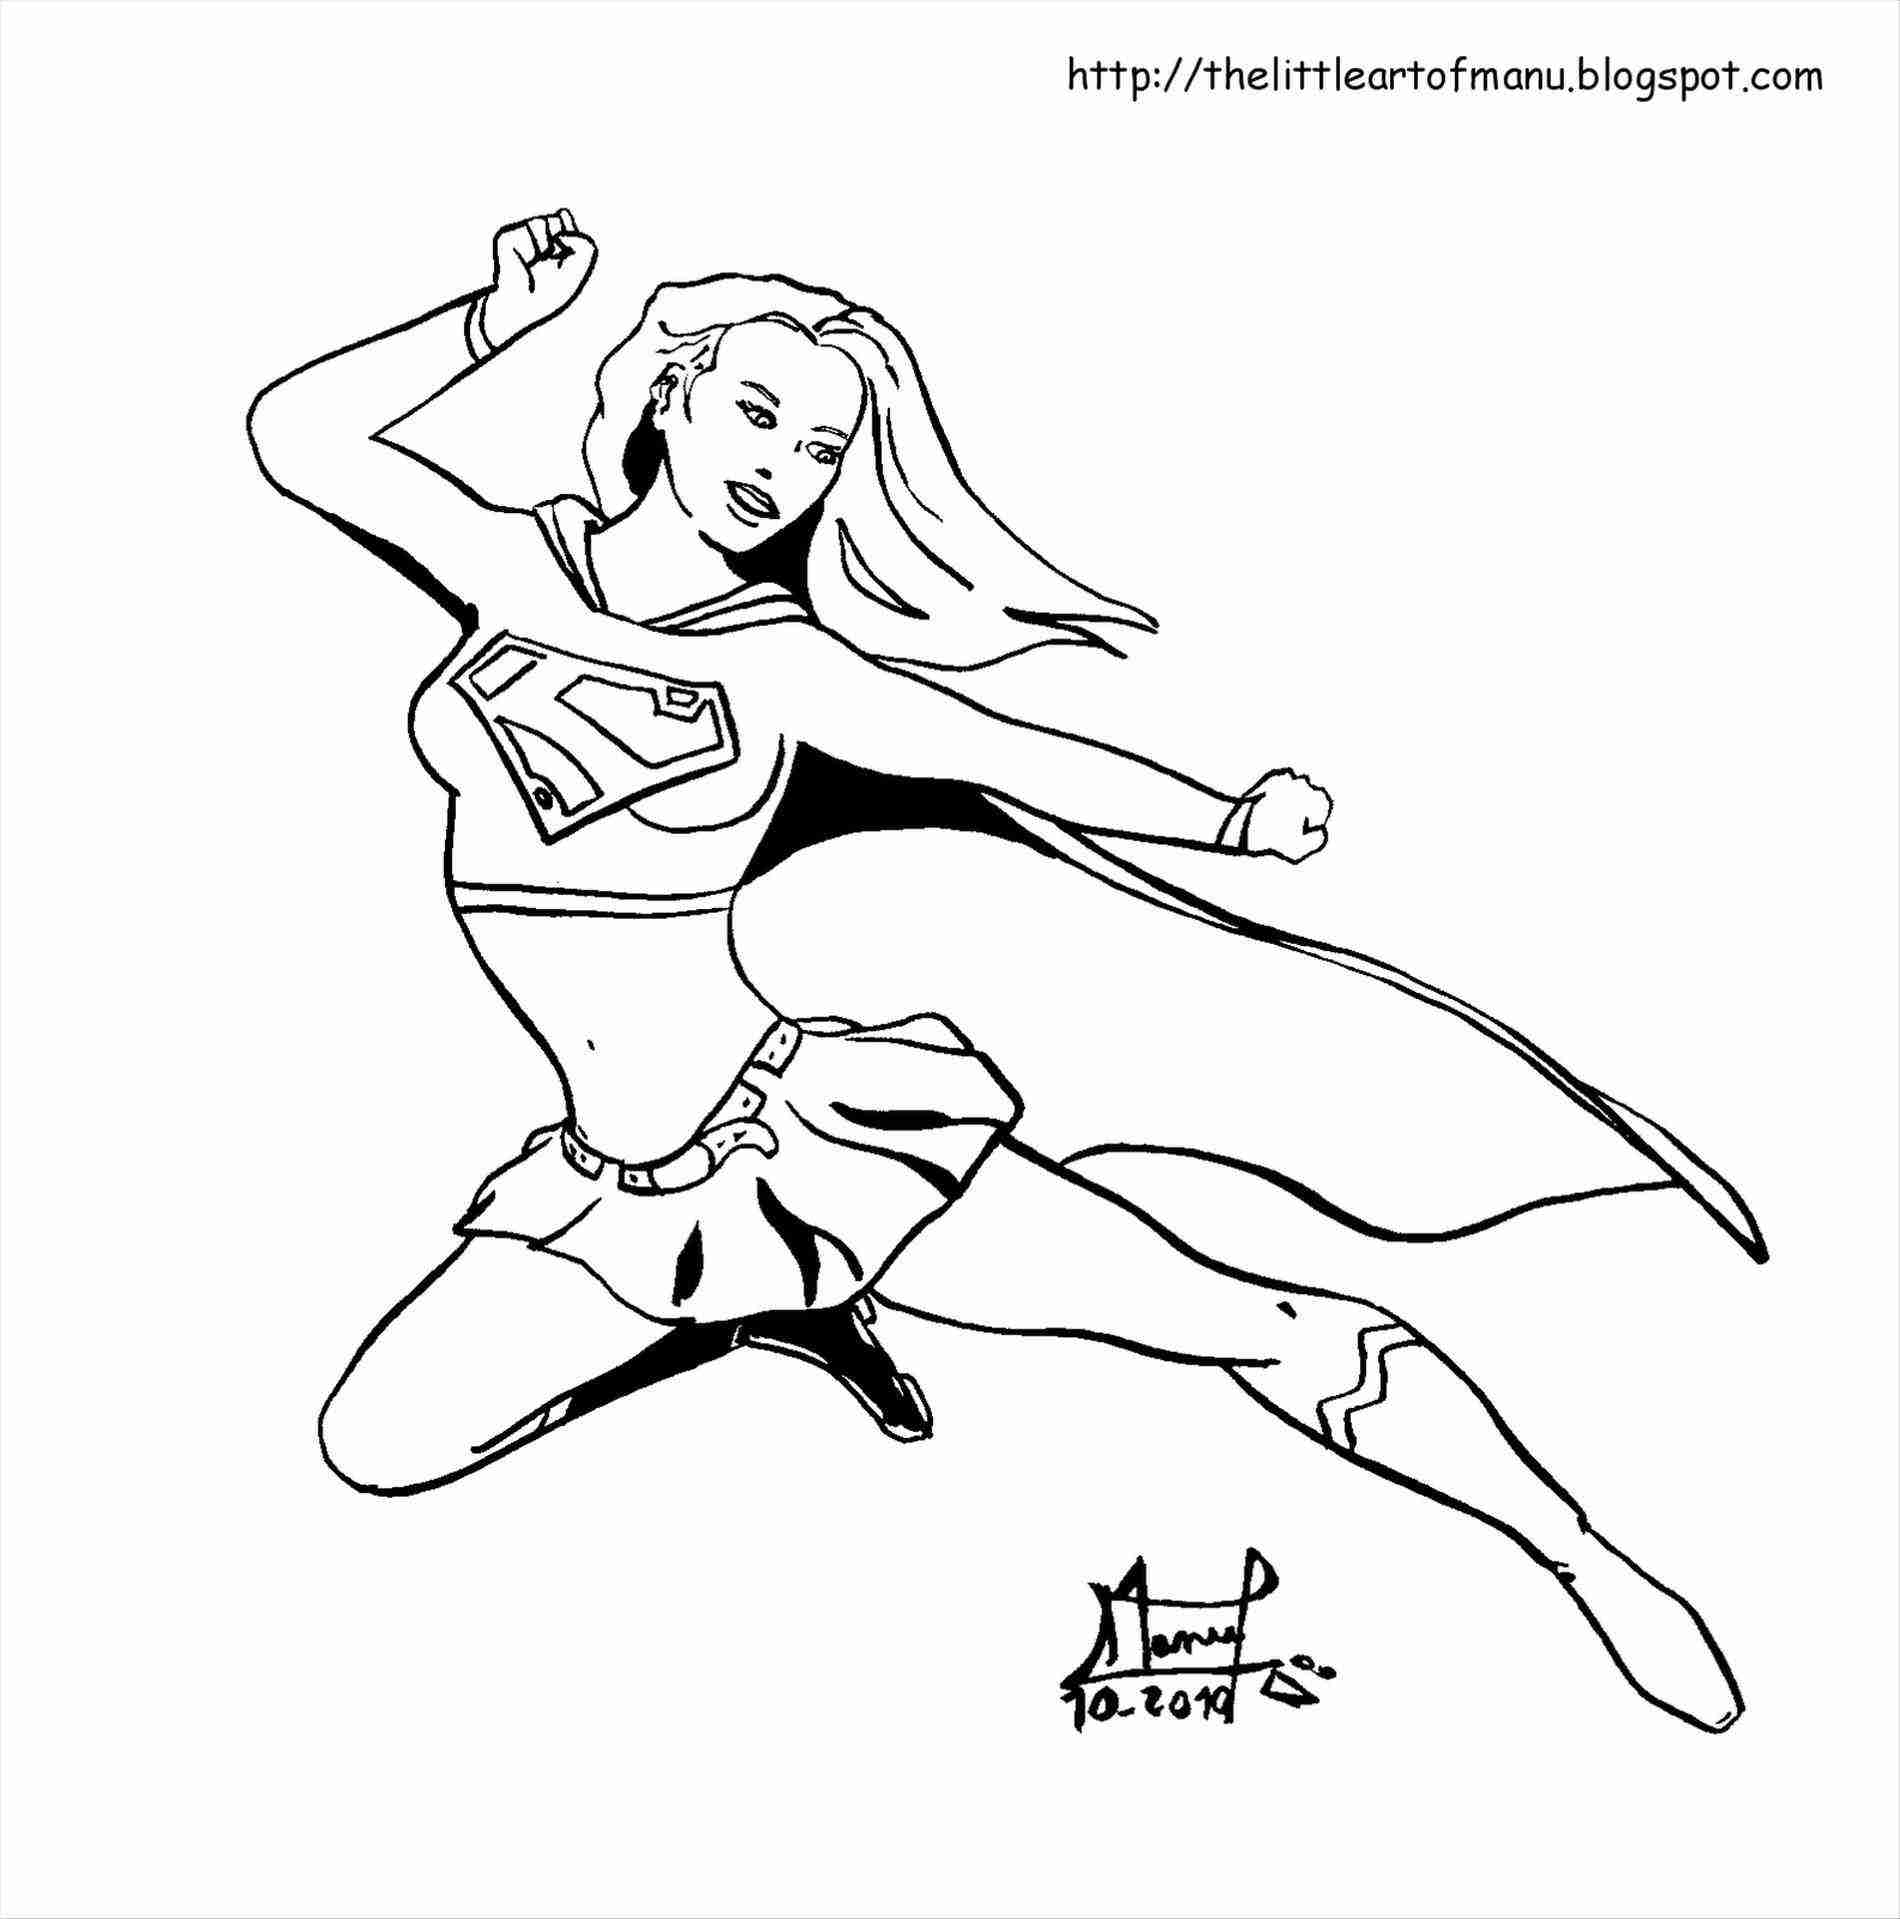 coloring-pages-of-supergirl-at-getdrawings-free-download